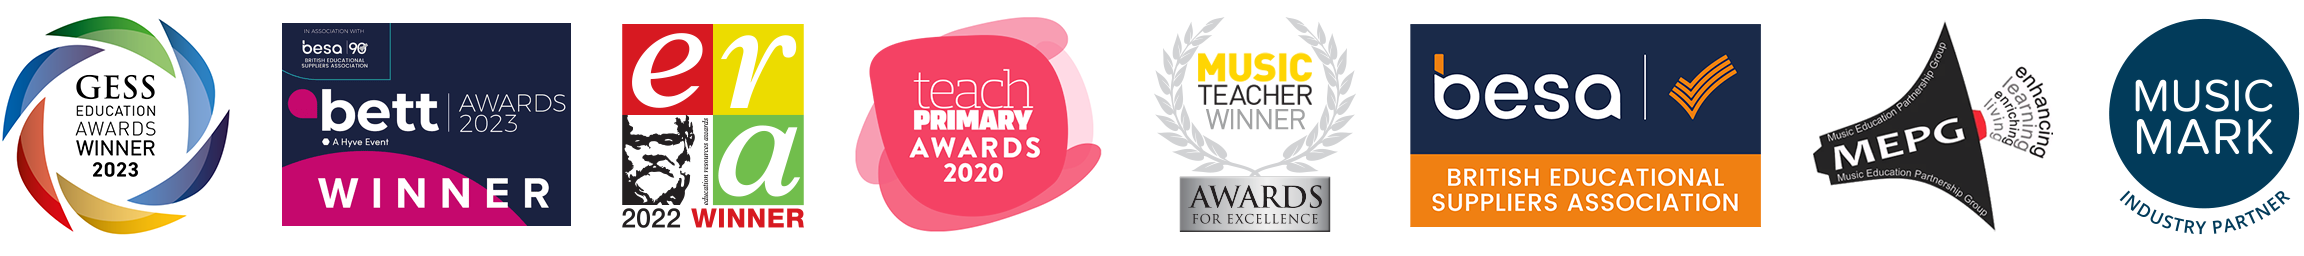 Awards and recognition for the Charanga music education platform and digital learning resources